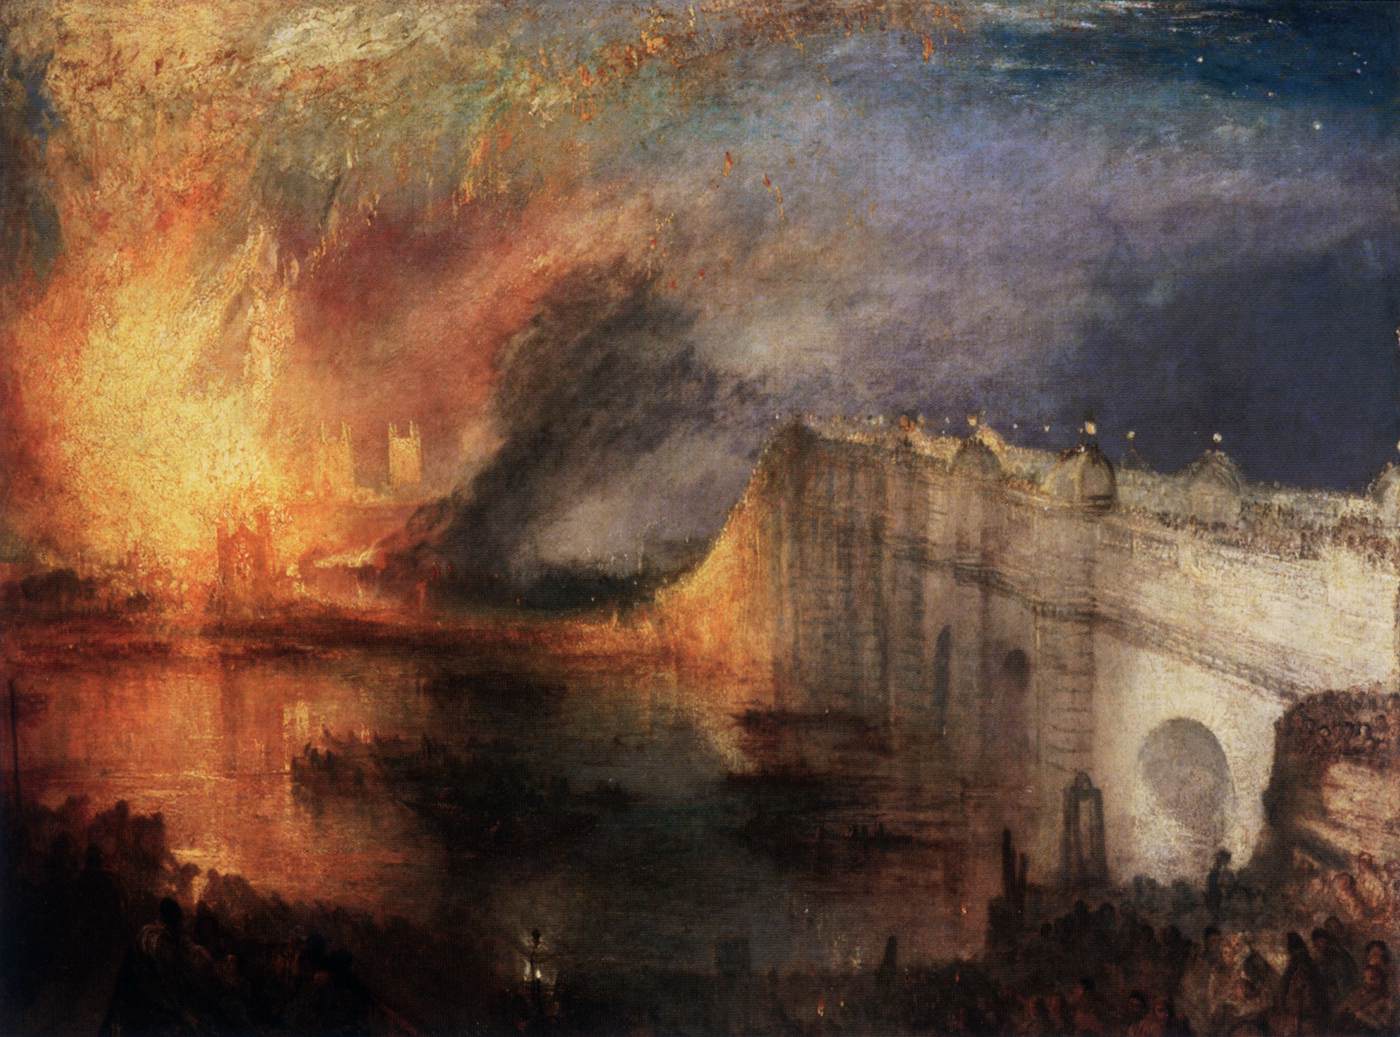 The Burning of the Houses of the Lords and the Common Goods, October 16, 1834